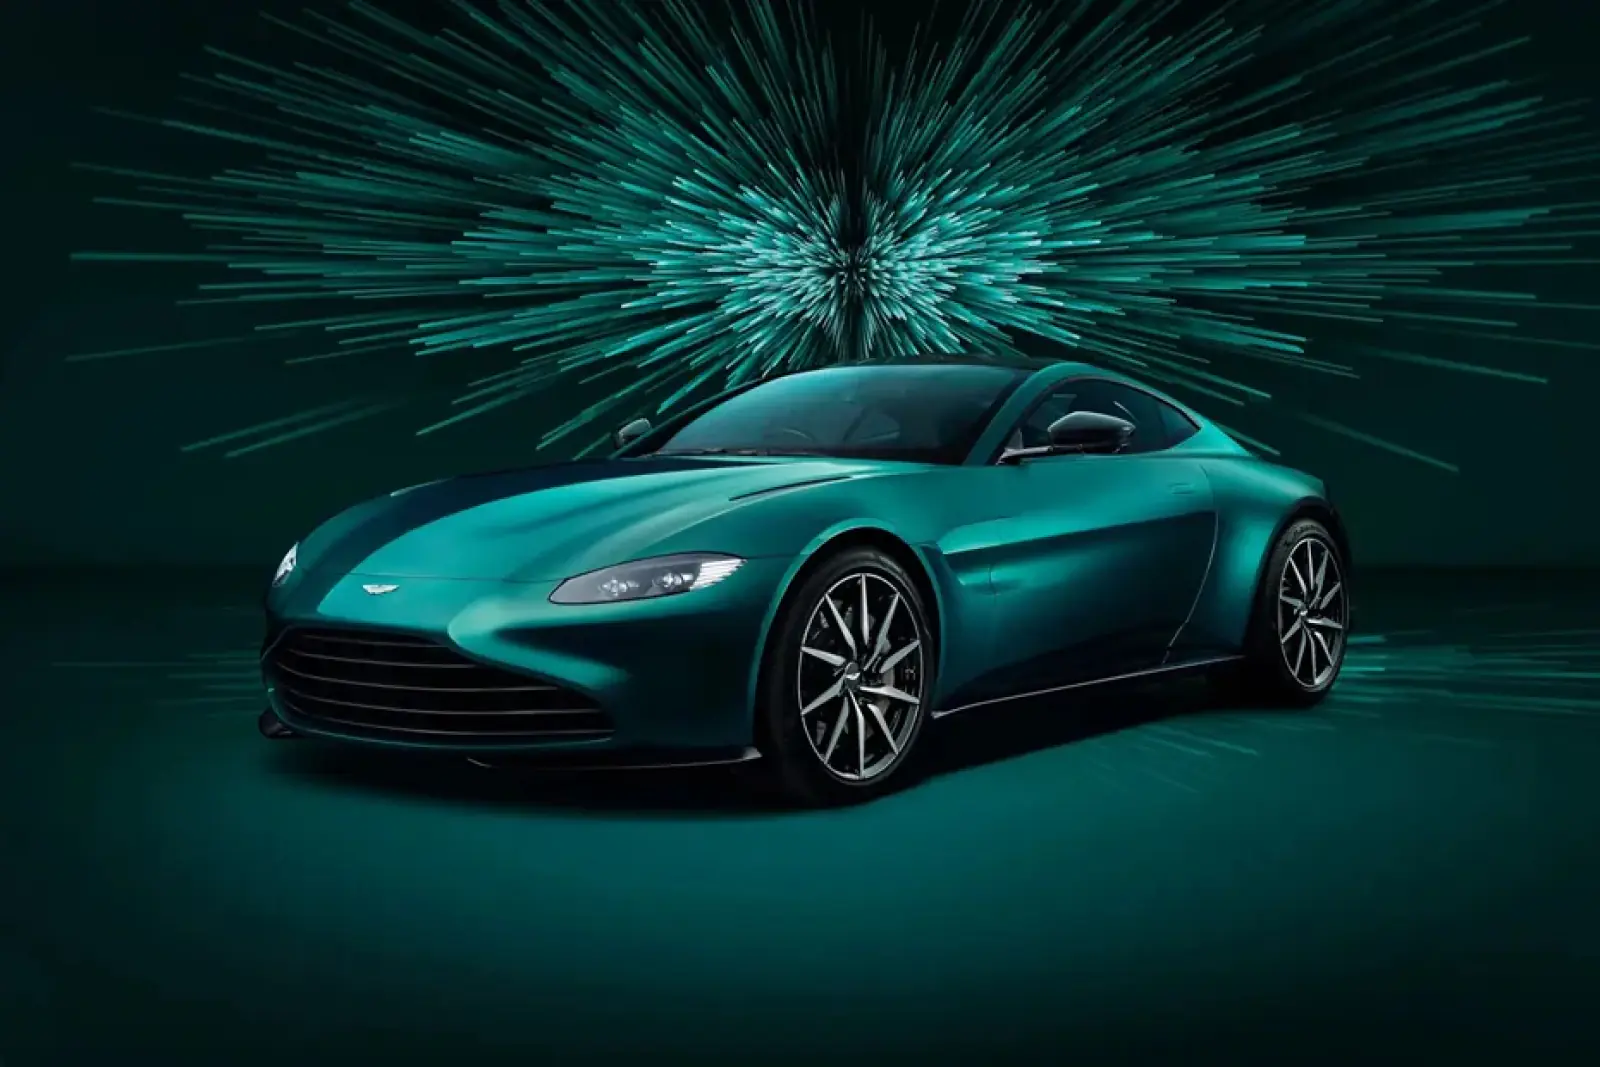 Aston Martin's New Vantage supercar launched for Rs 3.55 crore, know what are its features